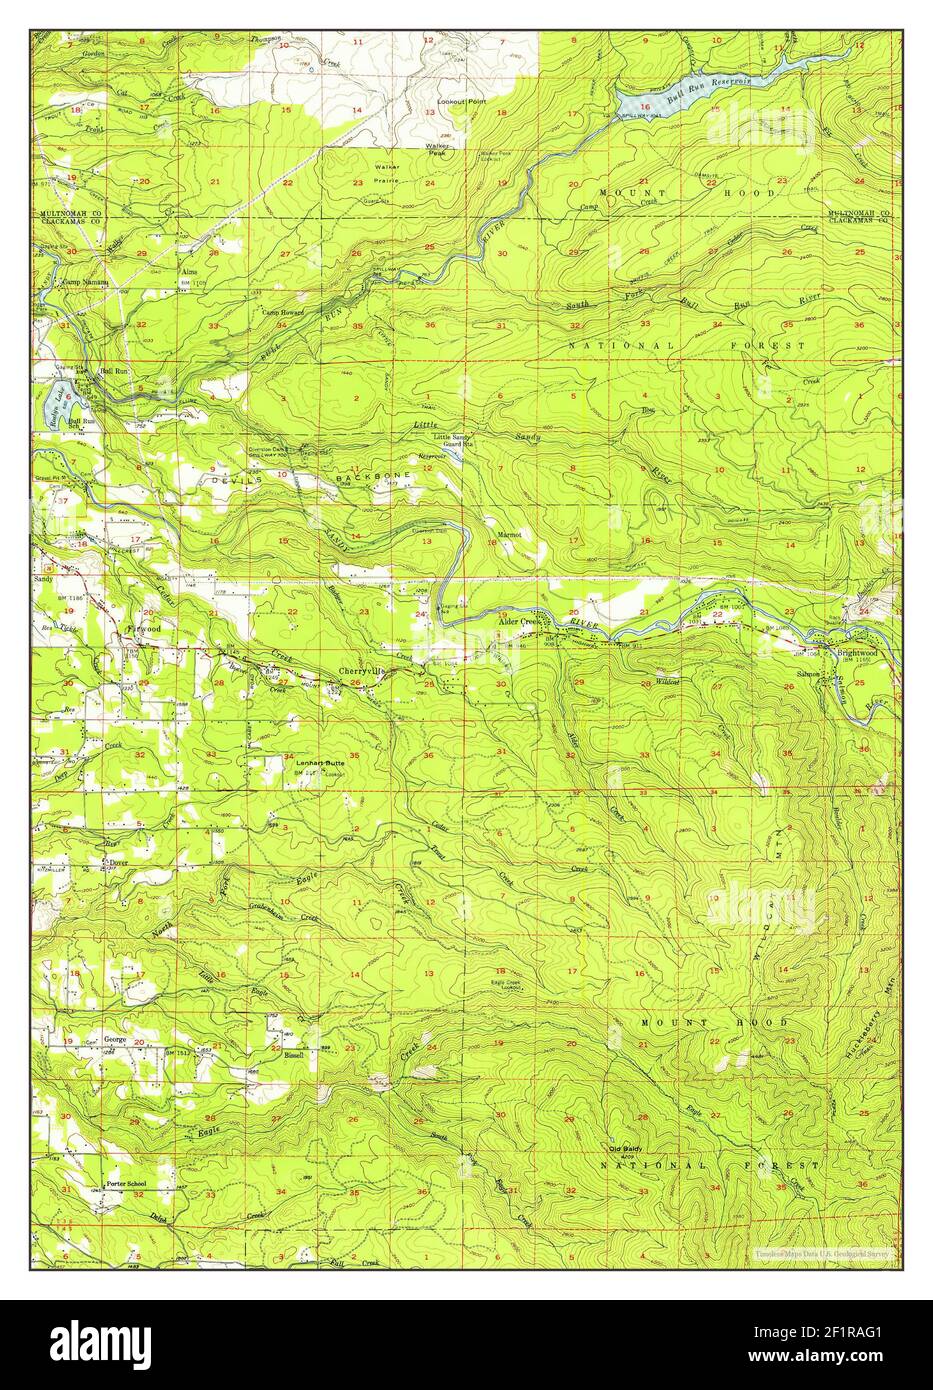 Cherryville, Oregon, map 1955, 1:62500, United States of America by Timeless Maps, data U.S. Geological Survey Stock Photo